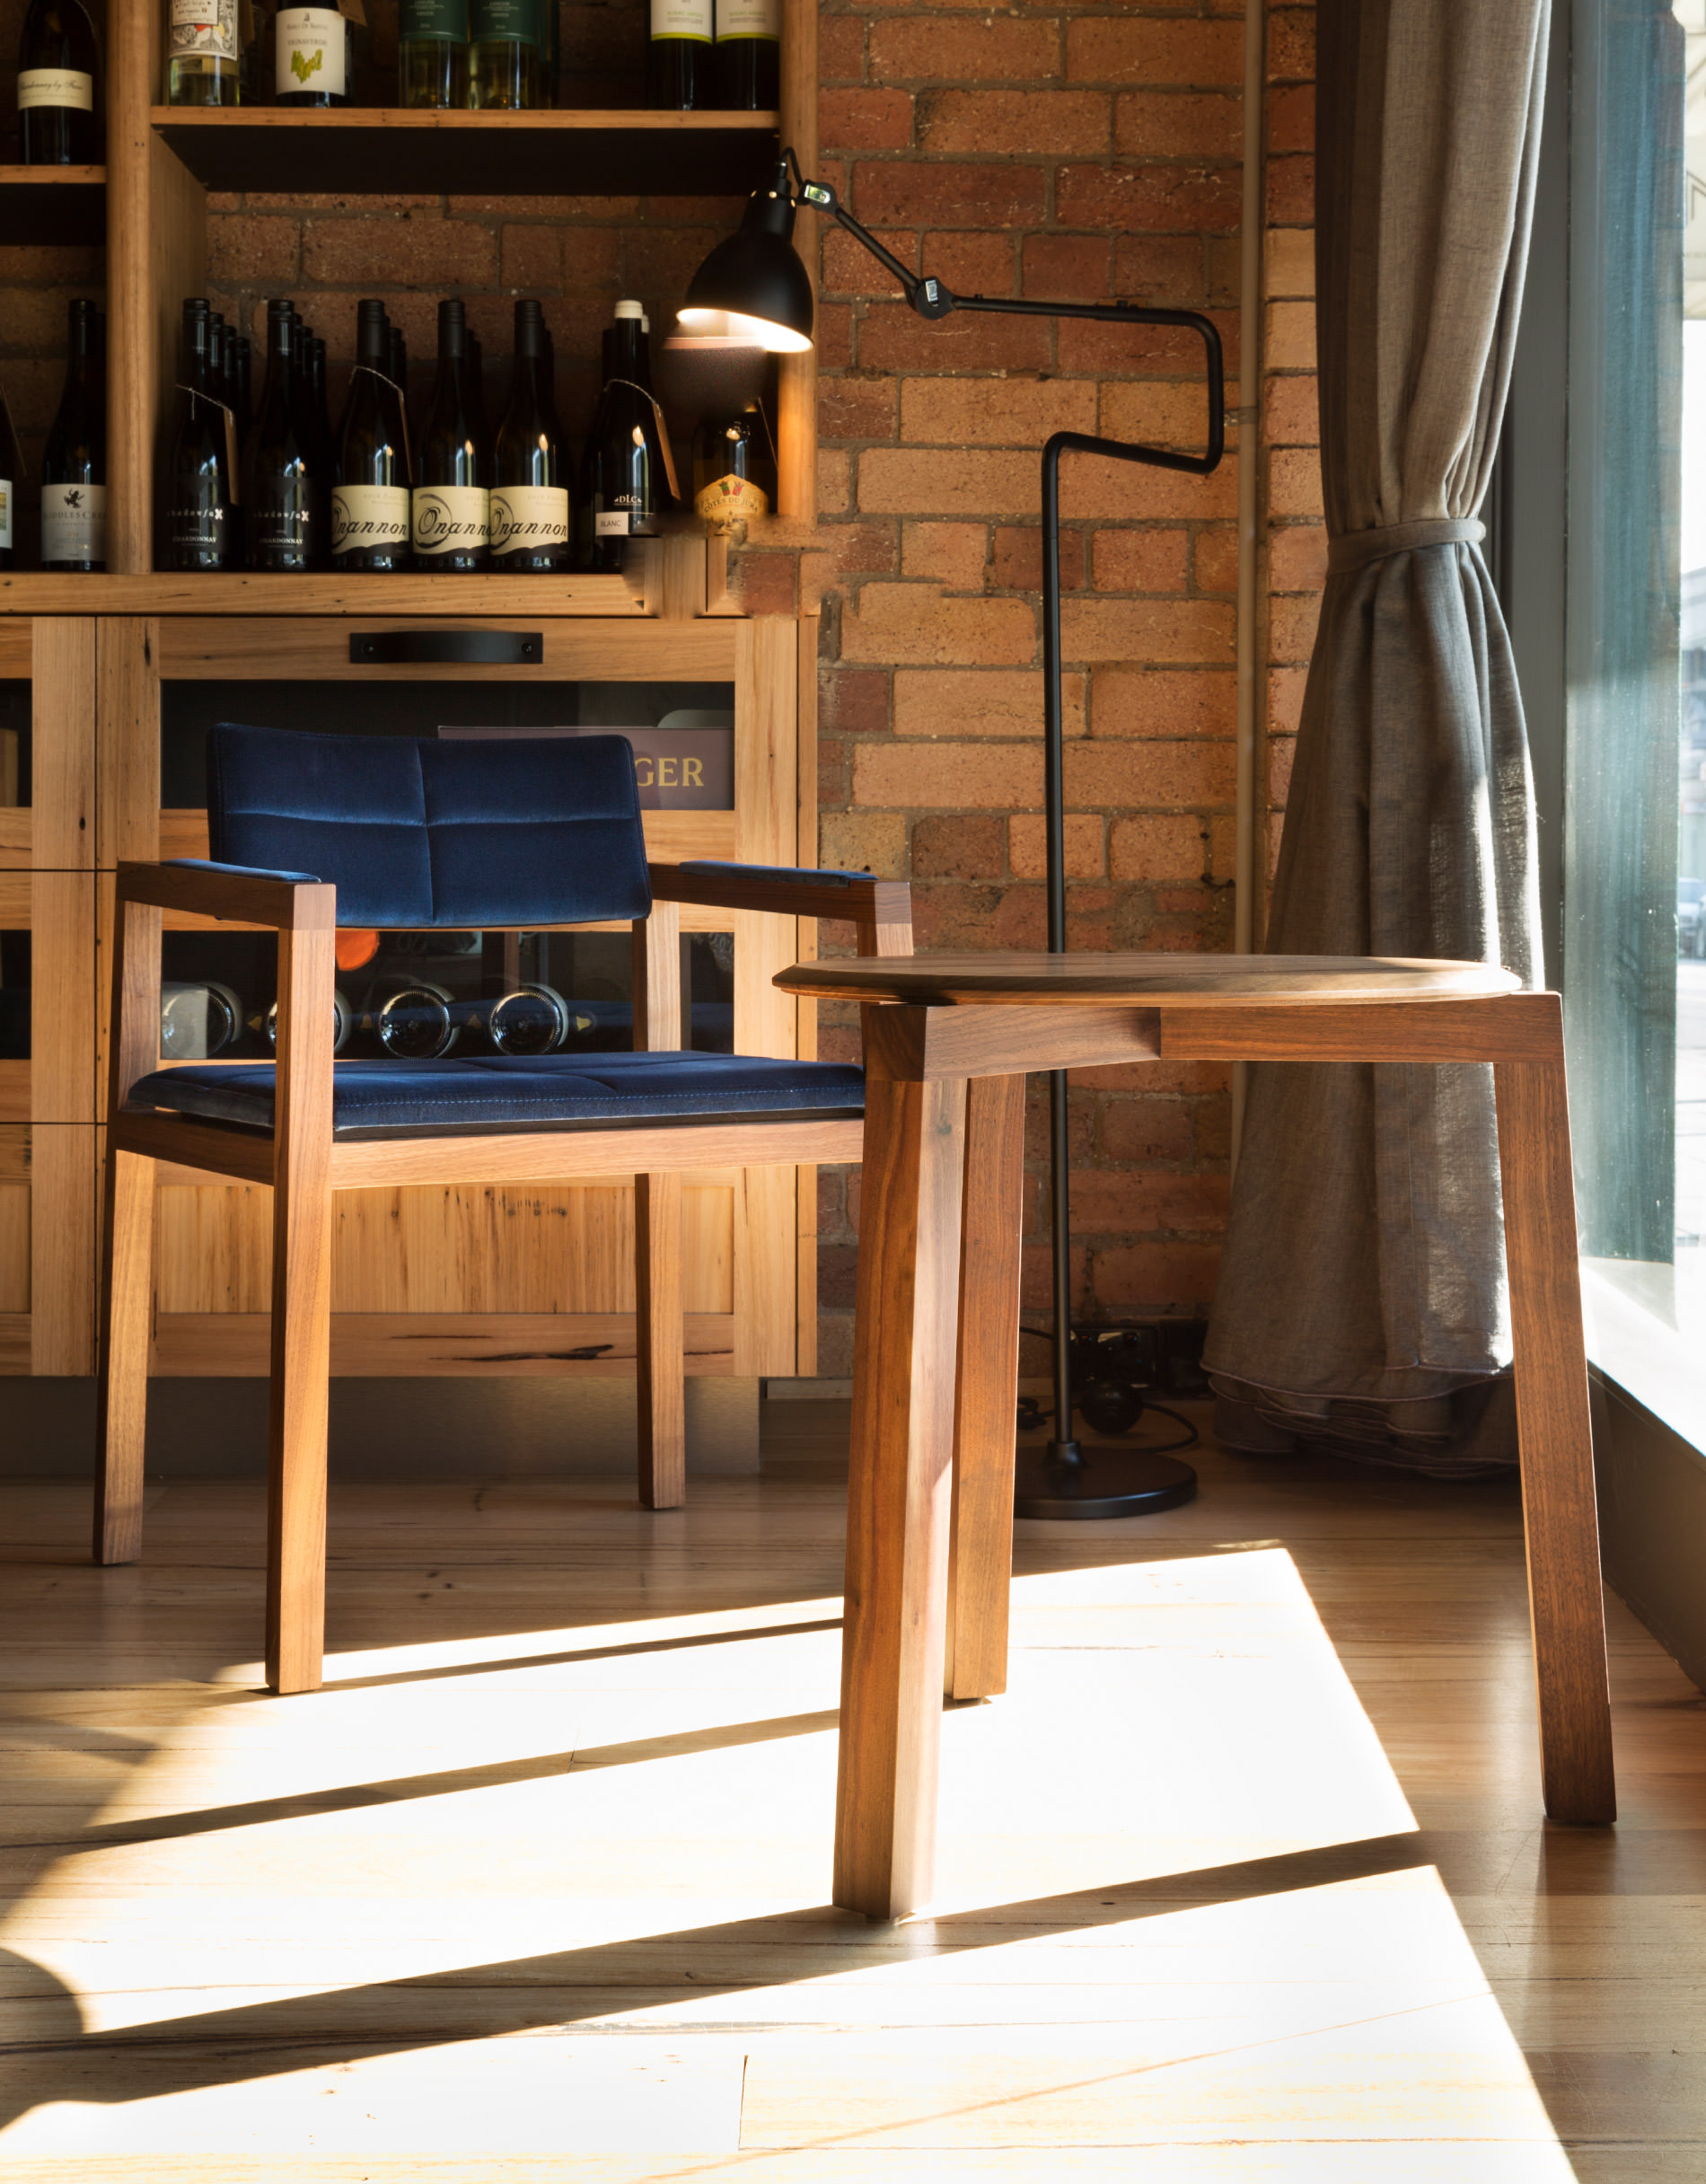 Solid cream brickwork, warm timber floors and a wine cabinet behind the designer dining chair by Australian designer Francocrea all come together to create a wonderfully inviting space to relax